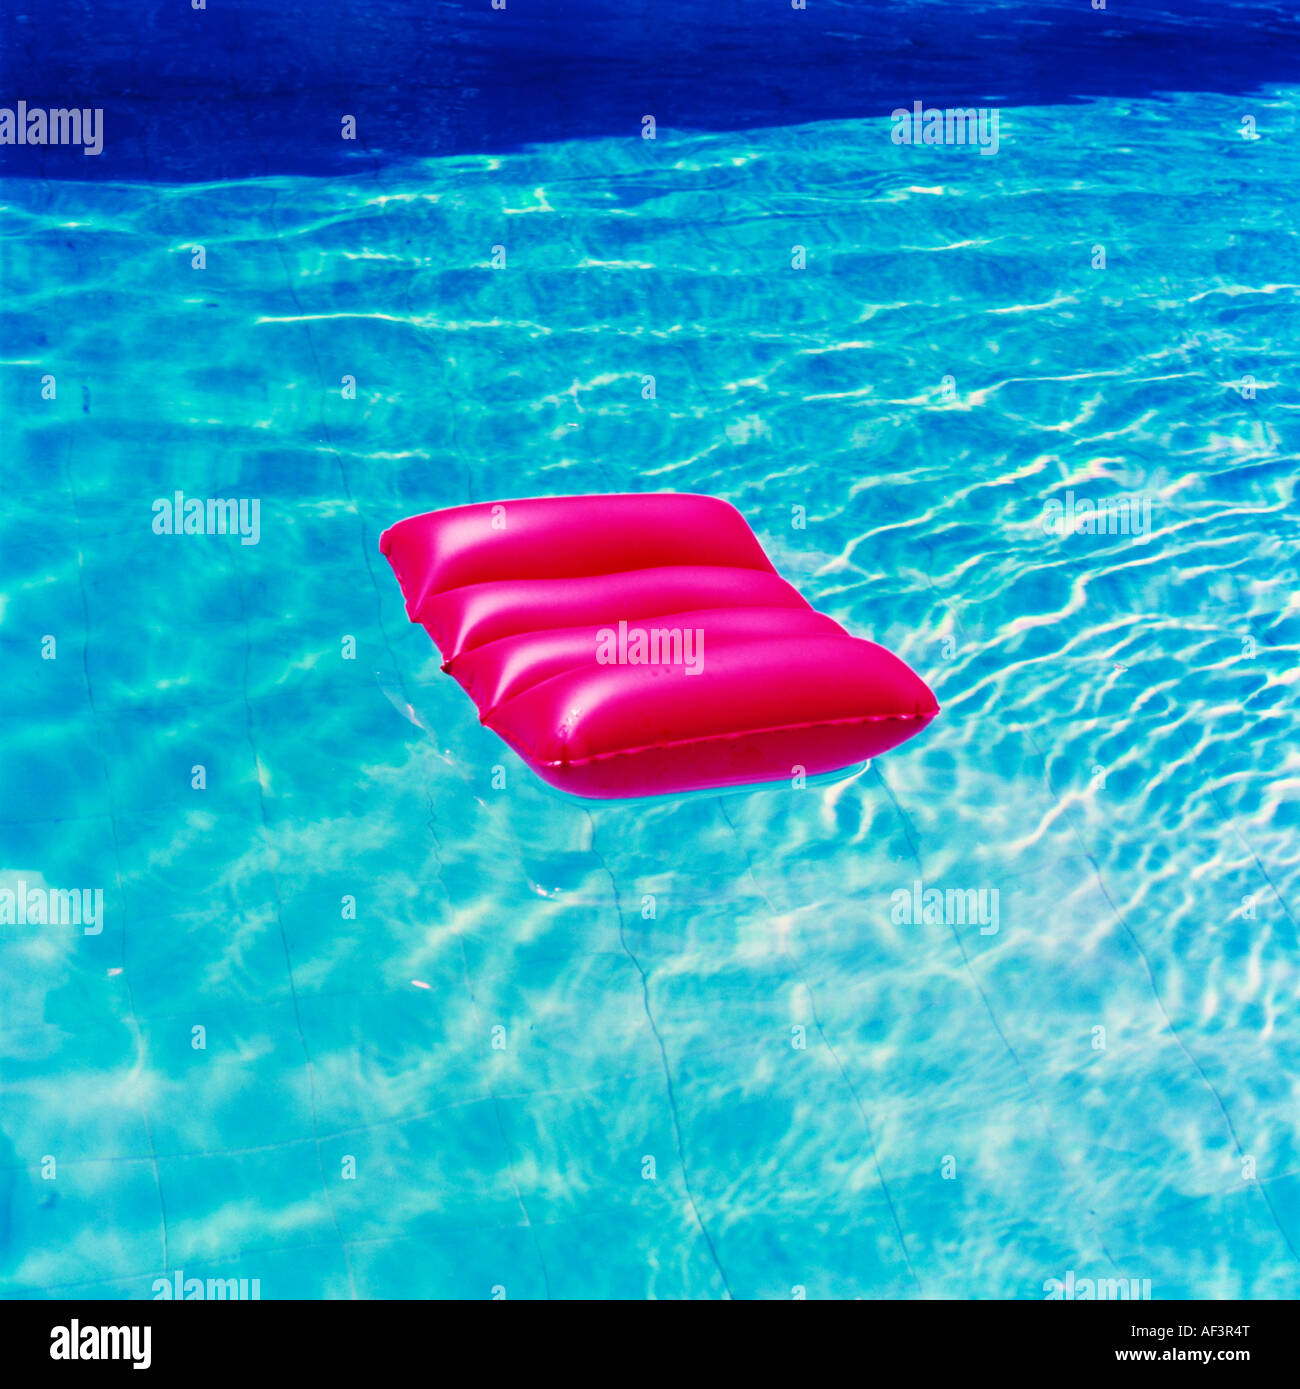 Red lilo in a swimming pool Stock Photo